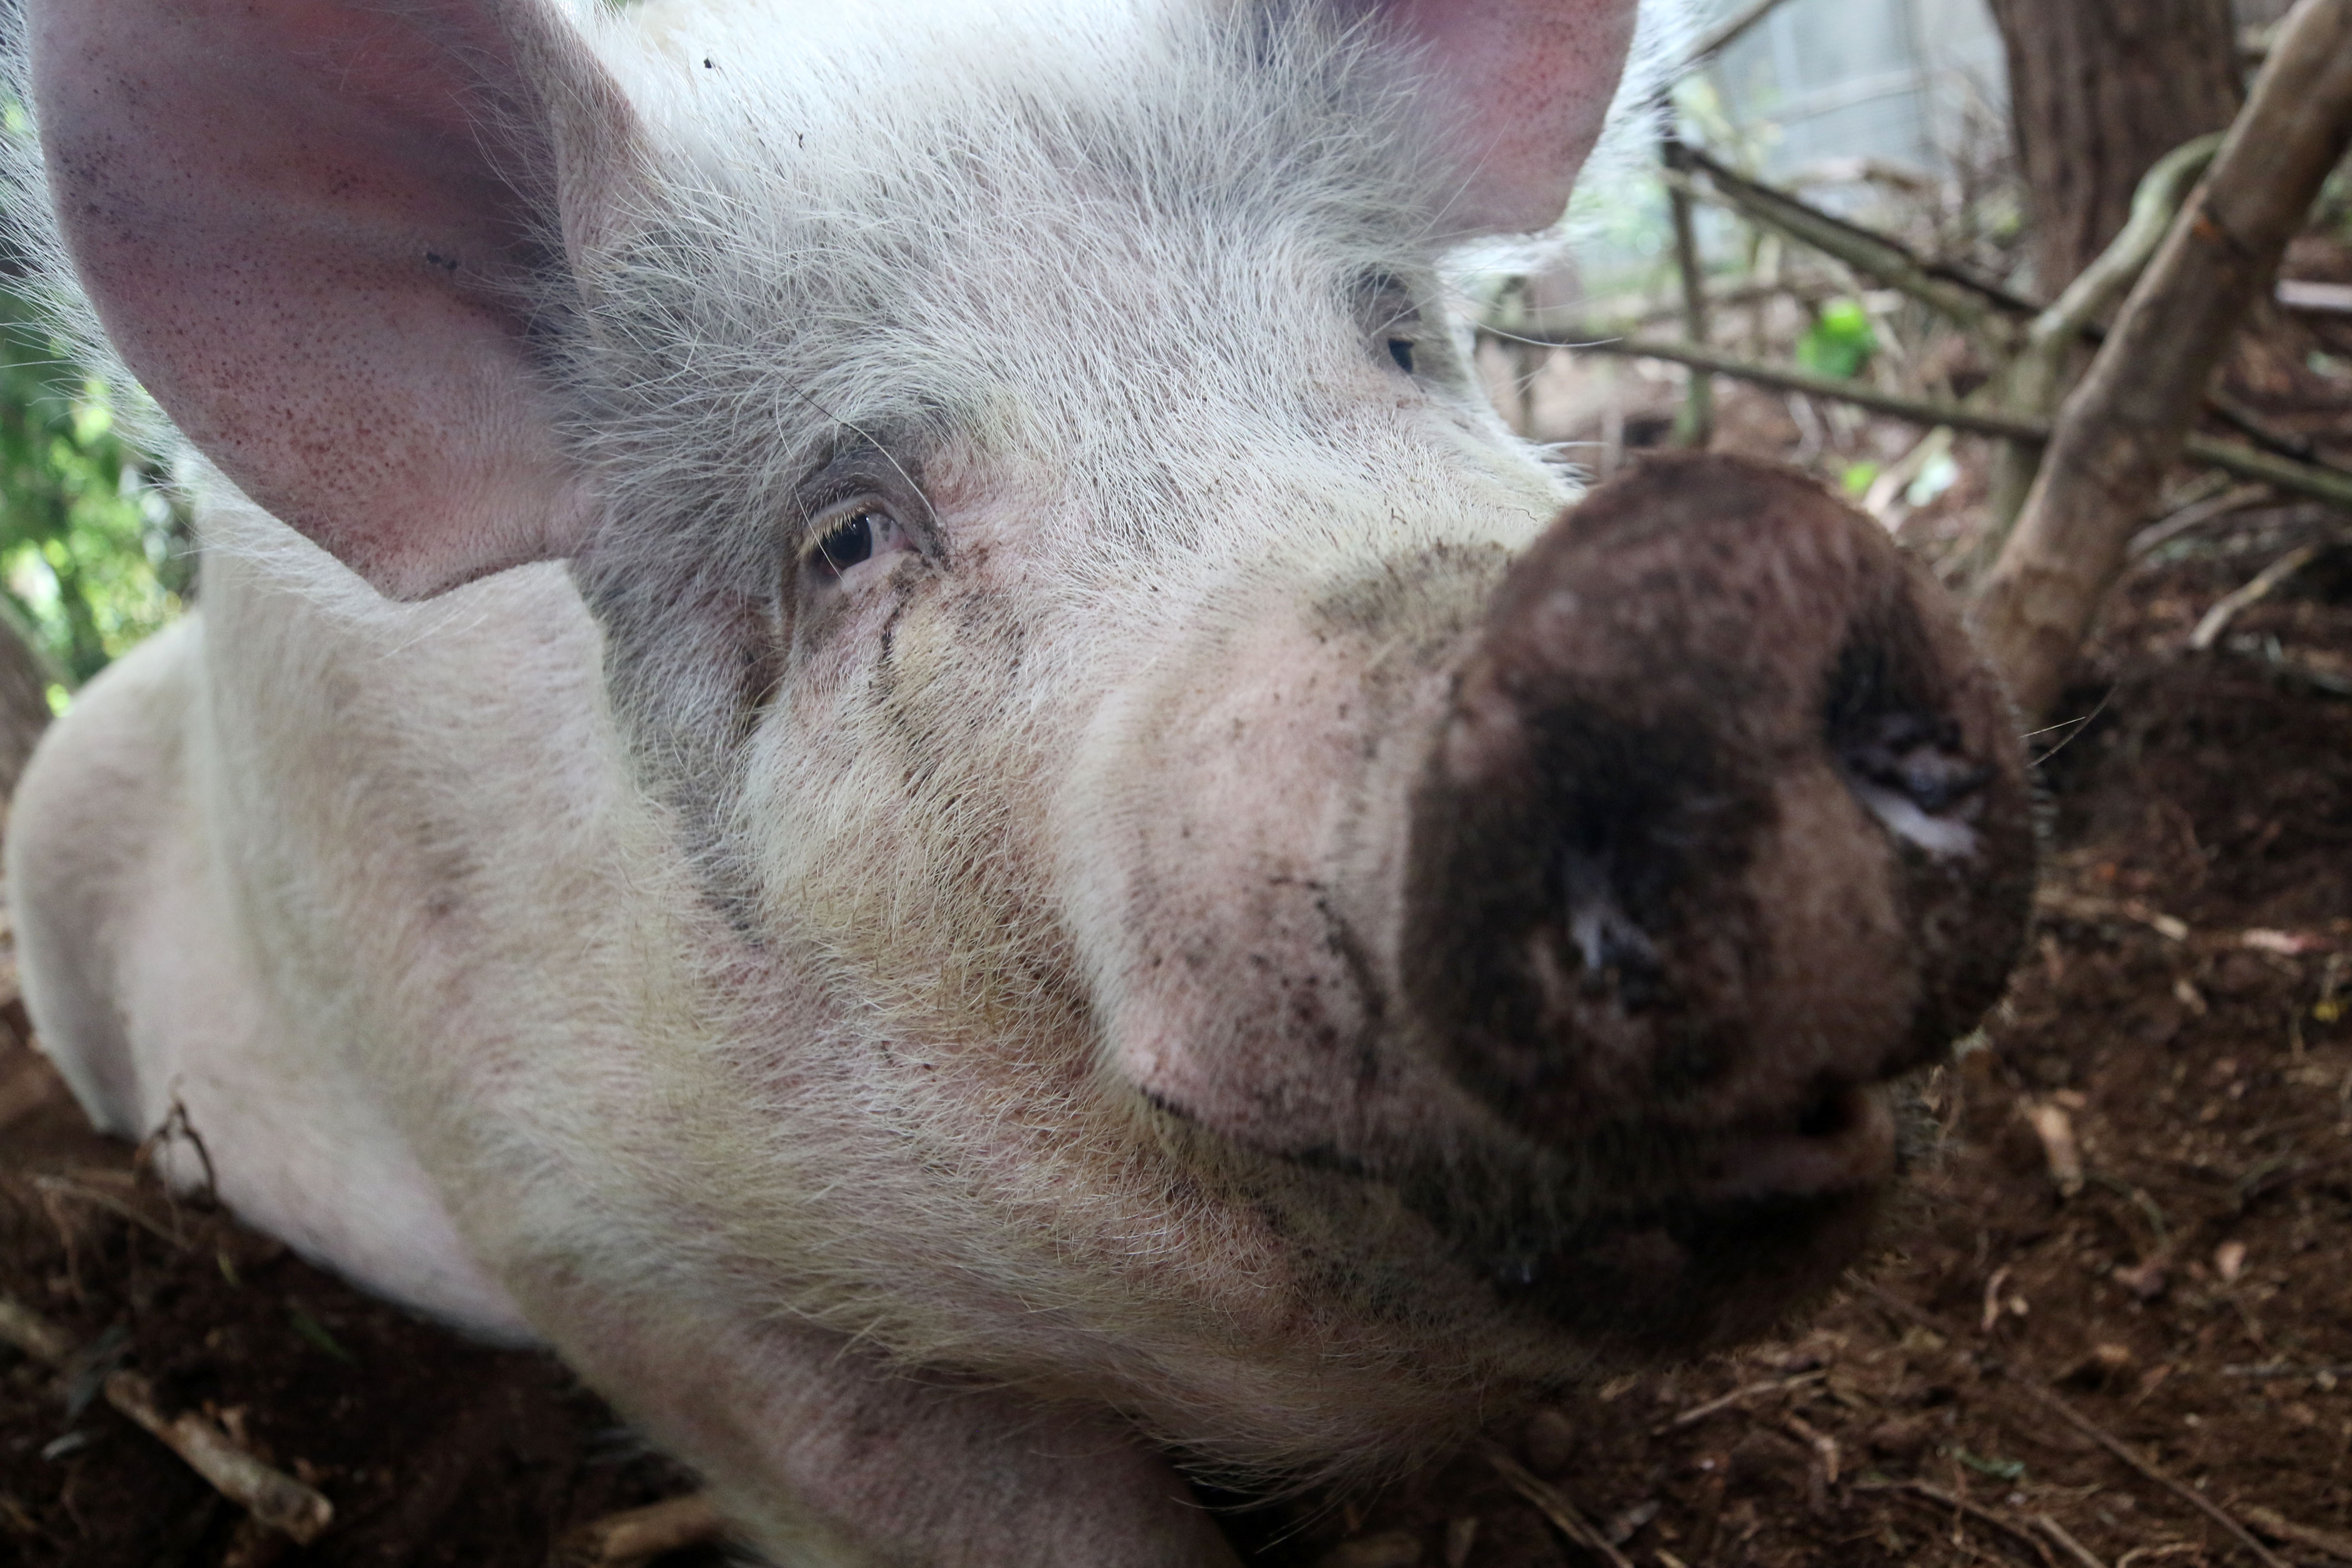 Pippa the pig in mourning following death of much-loved companion